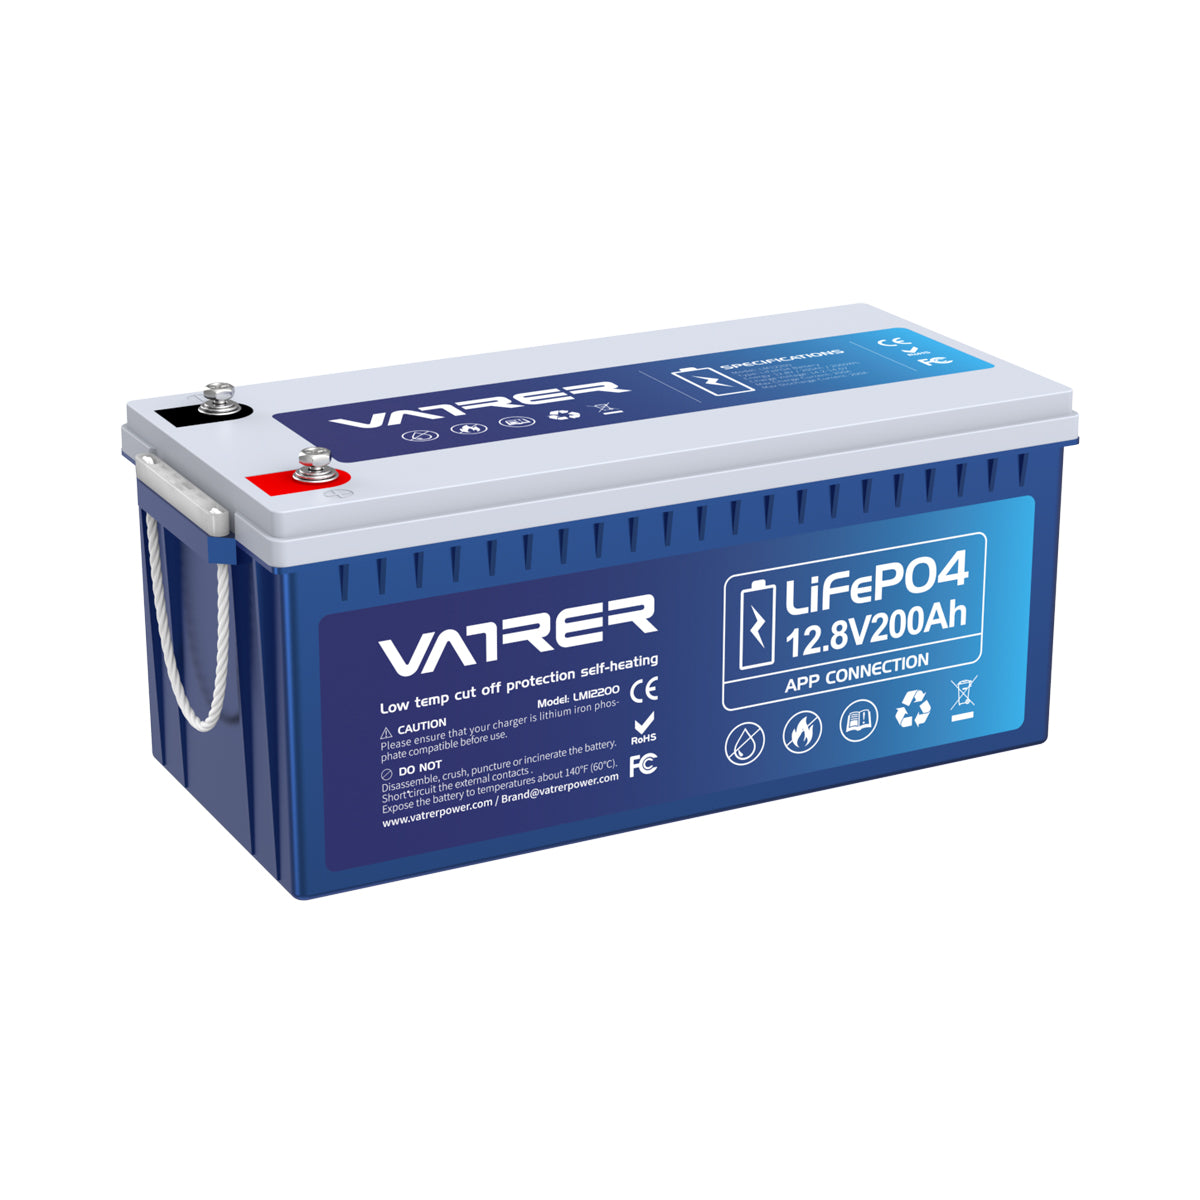 Vatrer 12V 200Ah Bluetooth LiFePO4 Lithium Battery with Self